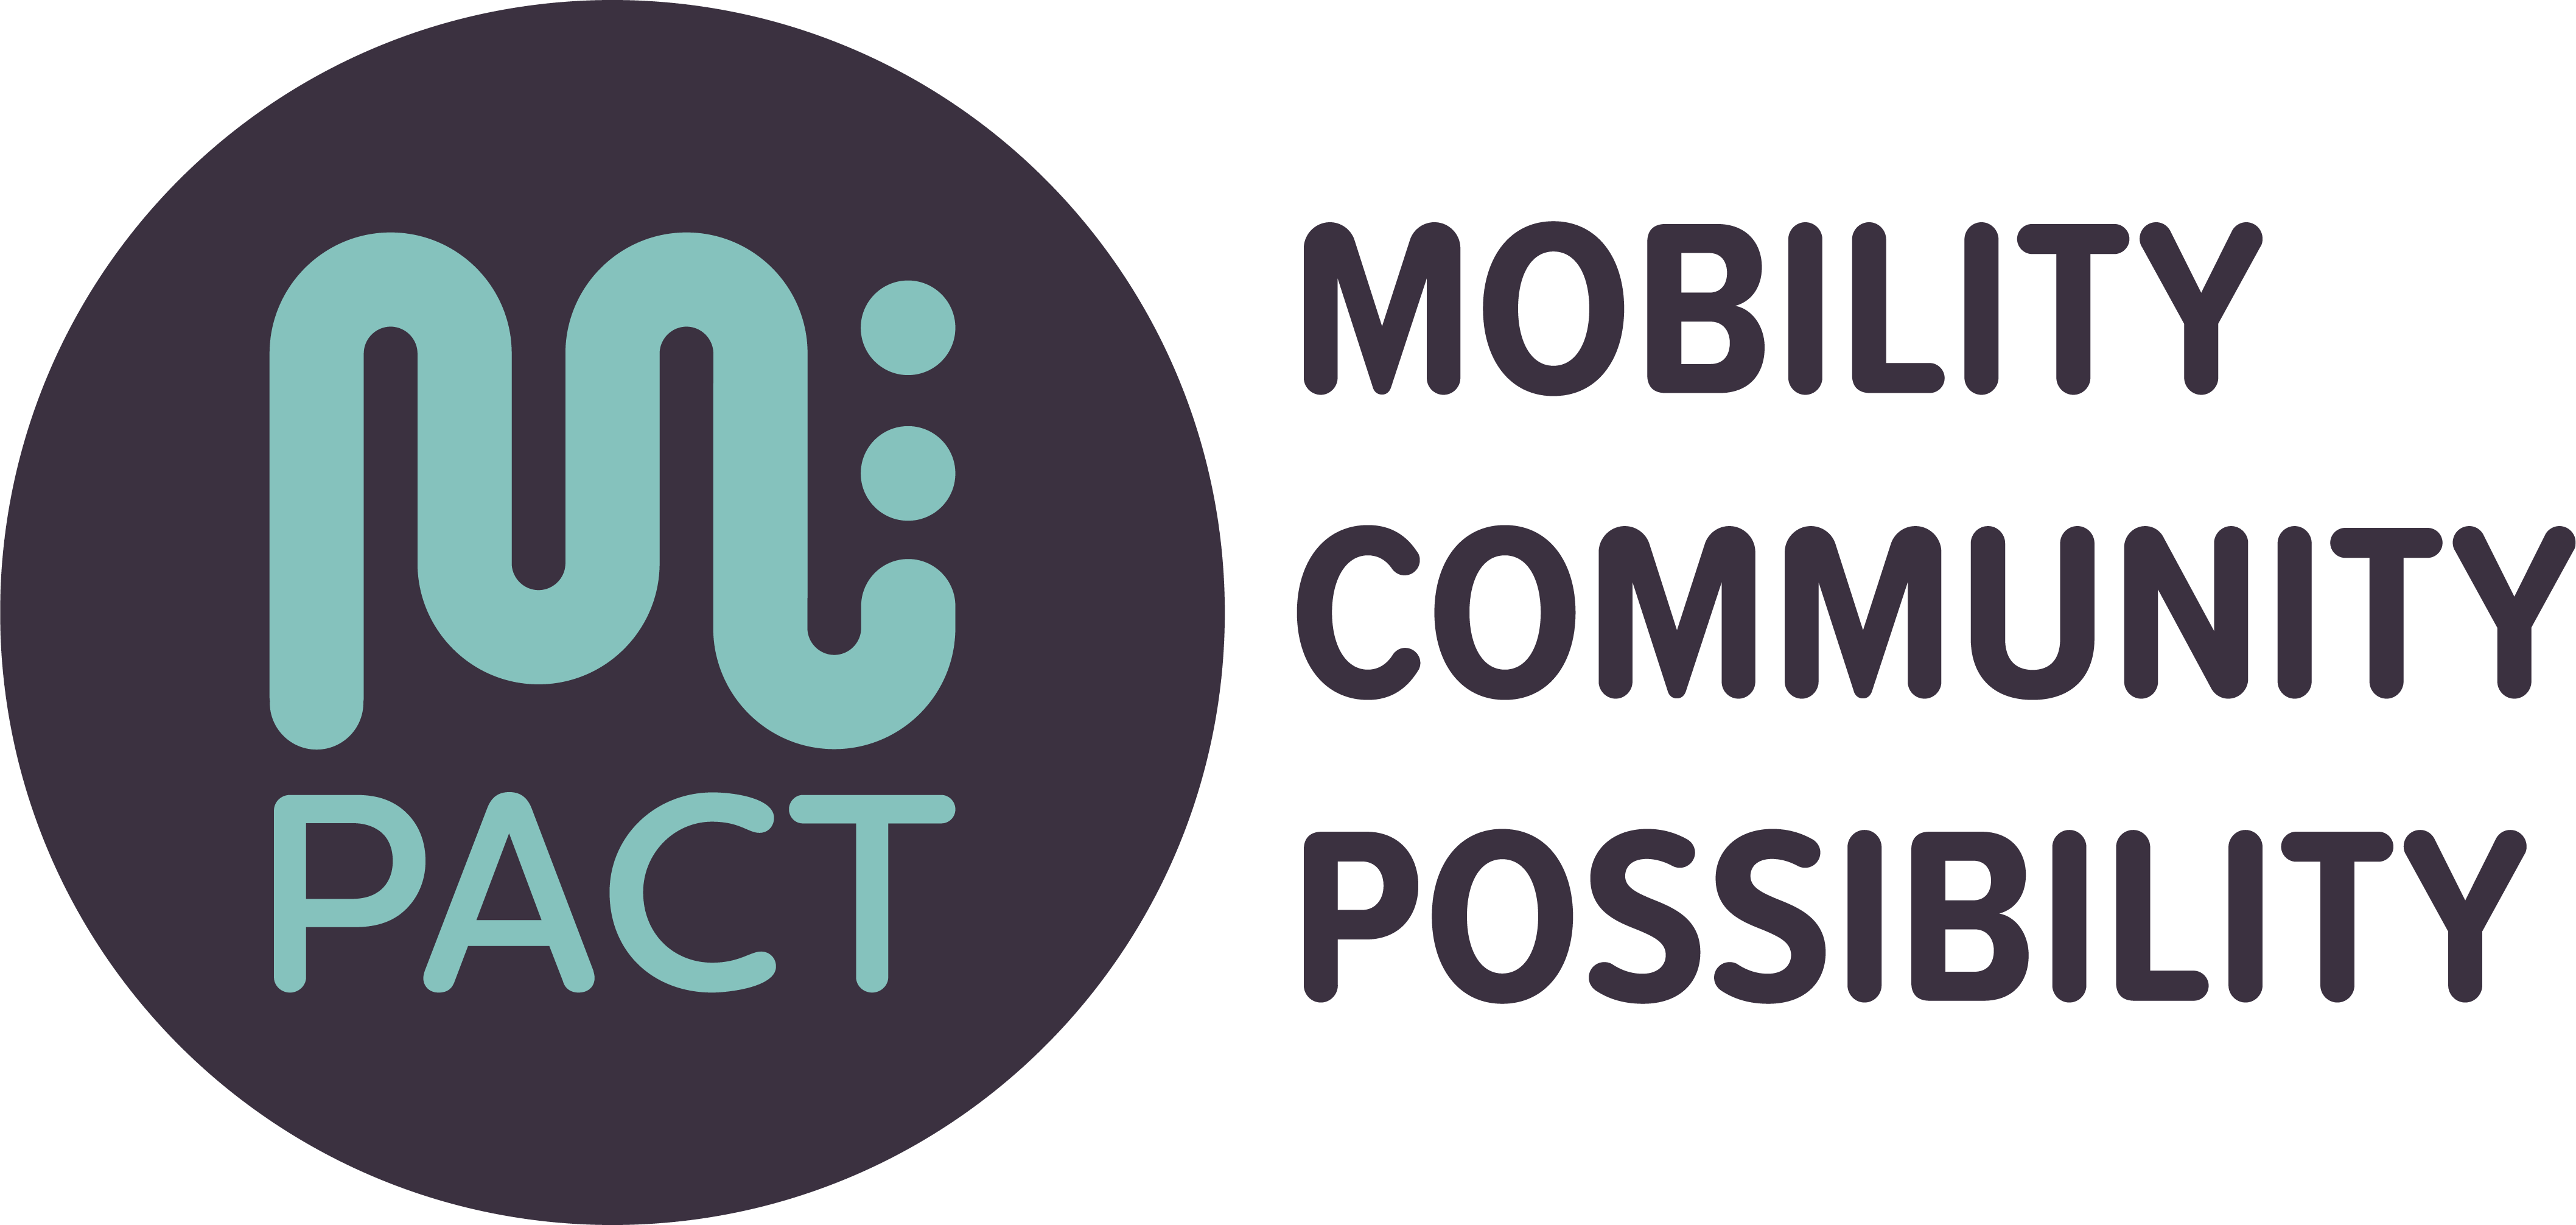 Mpact - Mobility, Community, Possibility